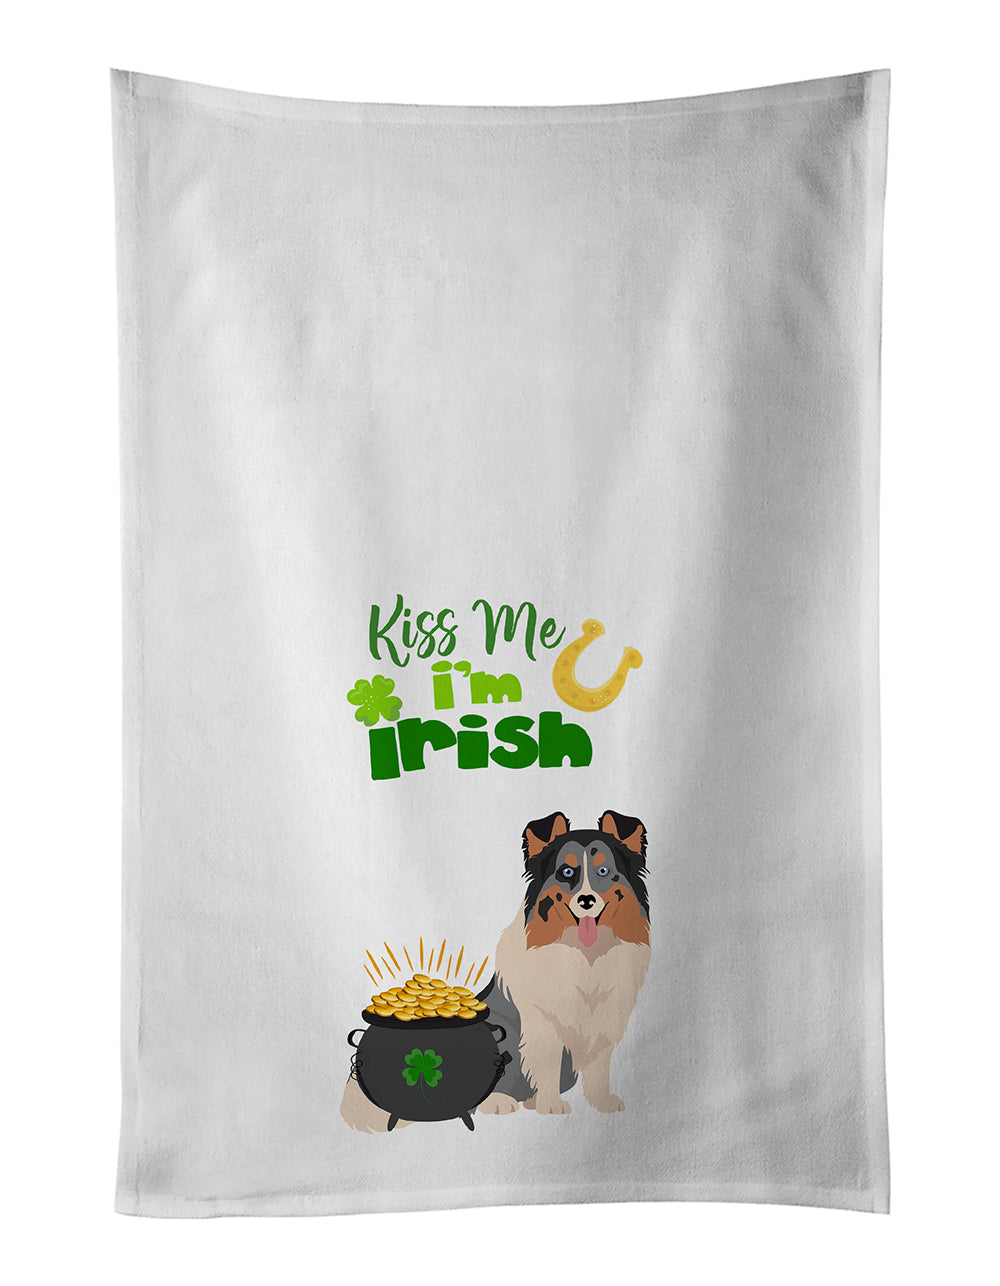 Buy this Blue Merle Sheltie St. Patrick's Day White Kitchen Towel Set of 2 Dish Towels